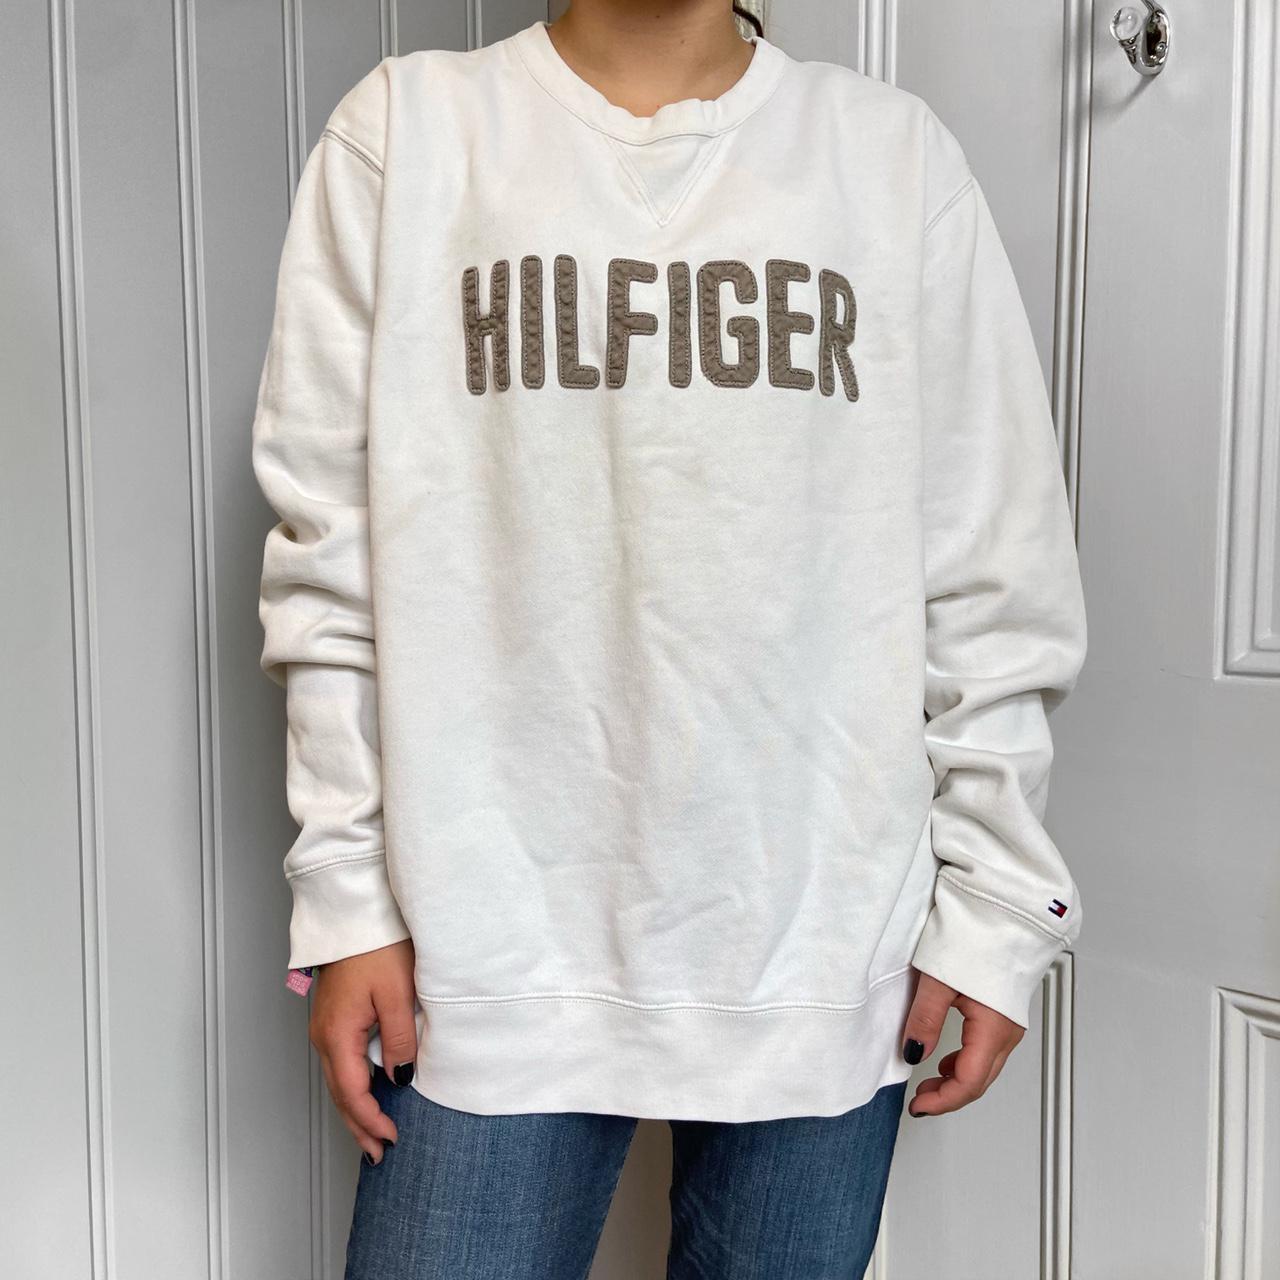 Product Image 1 - Vintage white Tommy Hilfiger spellout